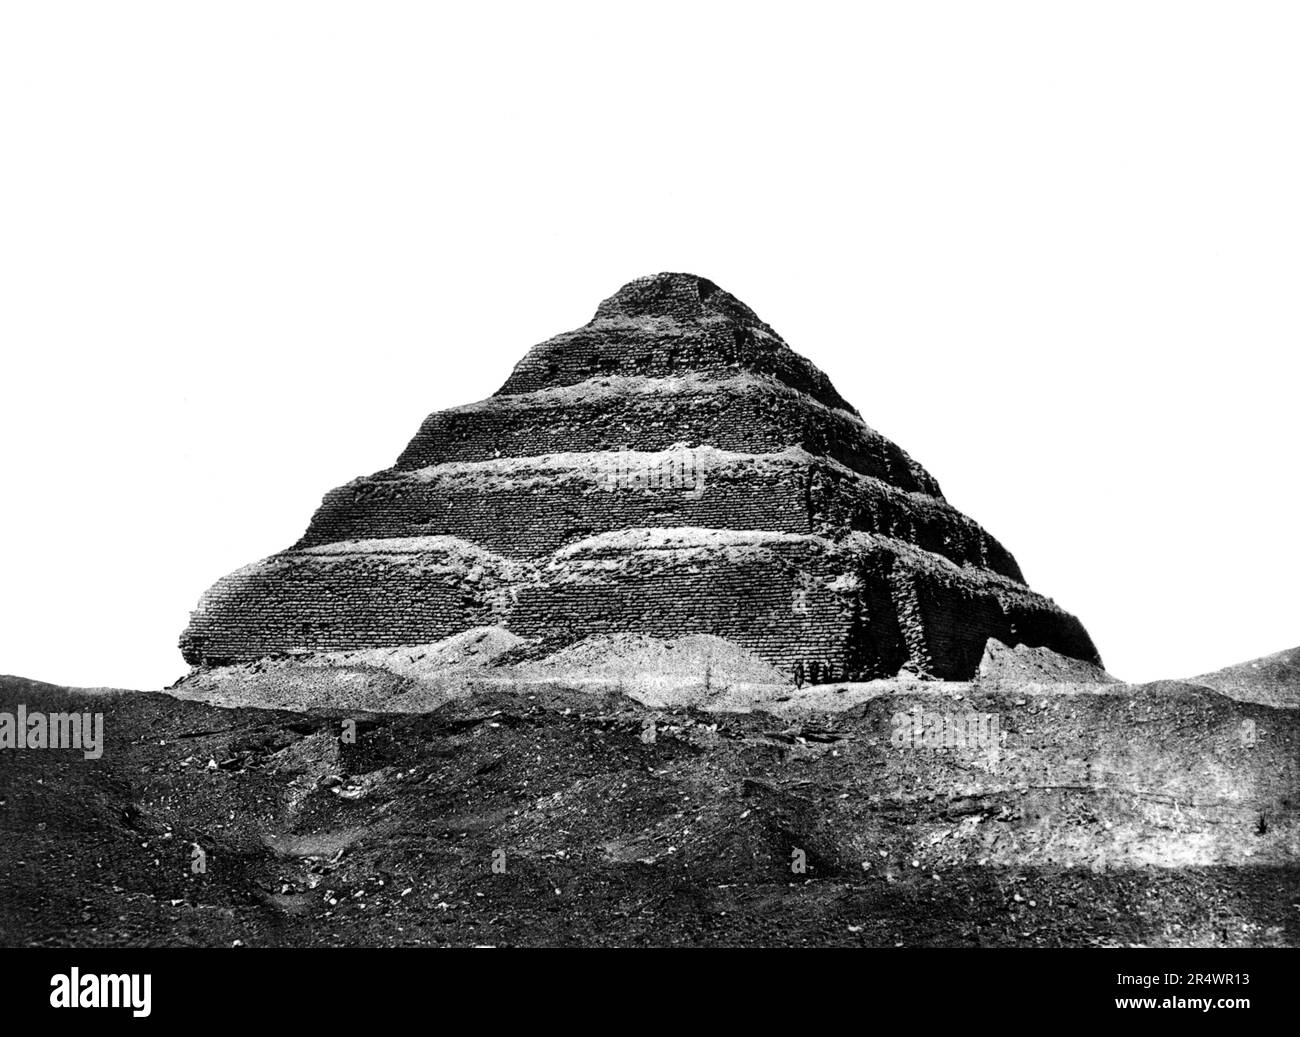 Step pyramid of Djoser (Zoser c2649-c2575 BC) at Saqqara.  Photographed in 1860s during work of Auguste Mariette-Bey (1821-1881) French archaeologist and founder of the Egyptian Museum, Cairo in 1863. Ancient Egypt Archaeology Stock Photo